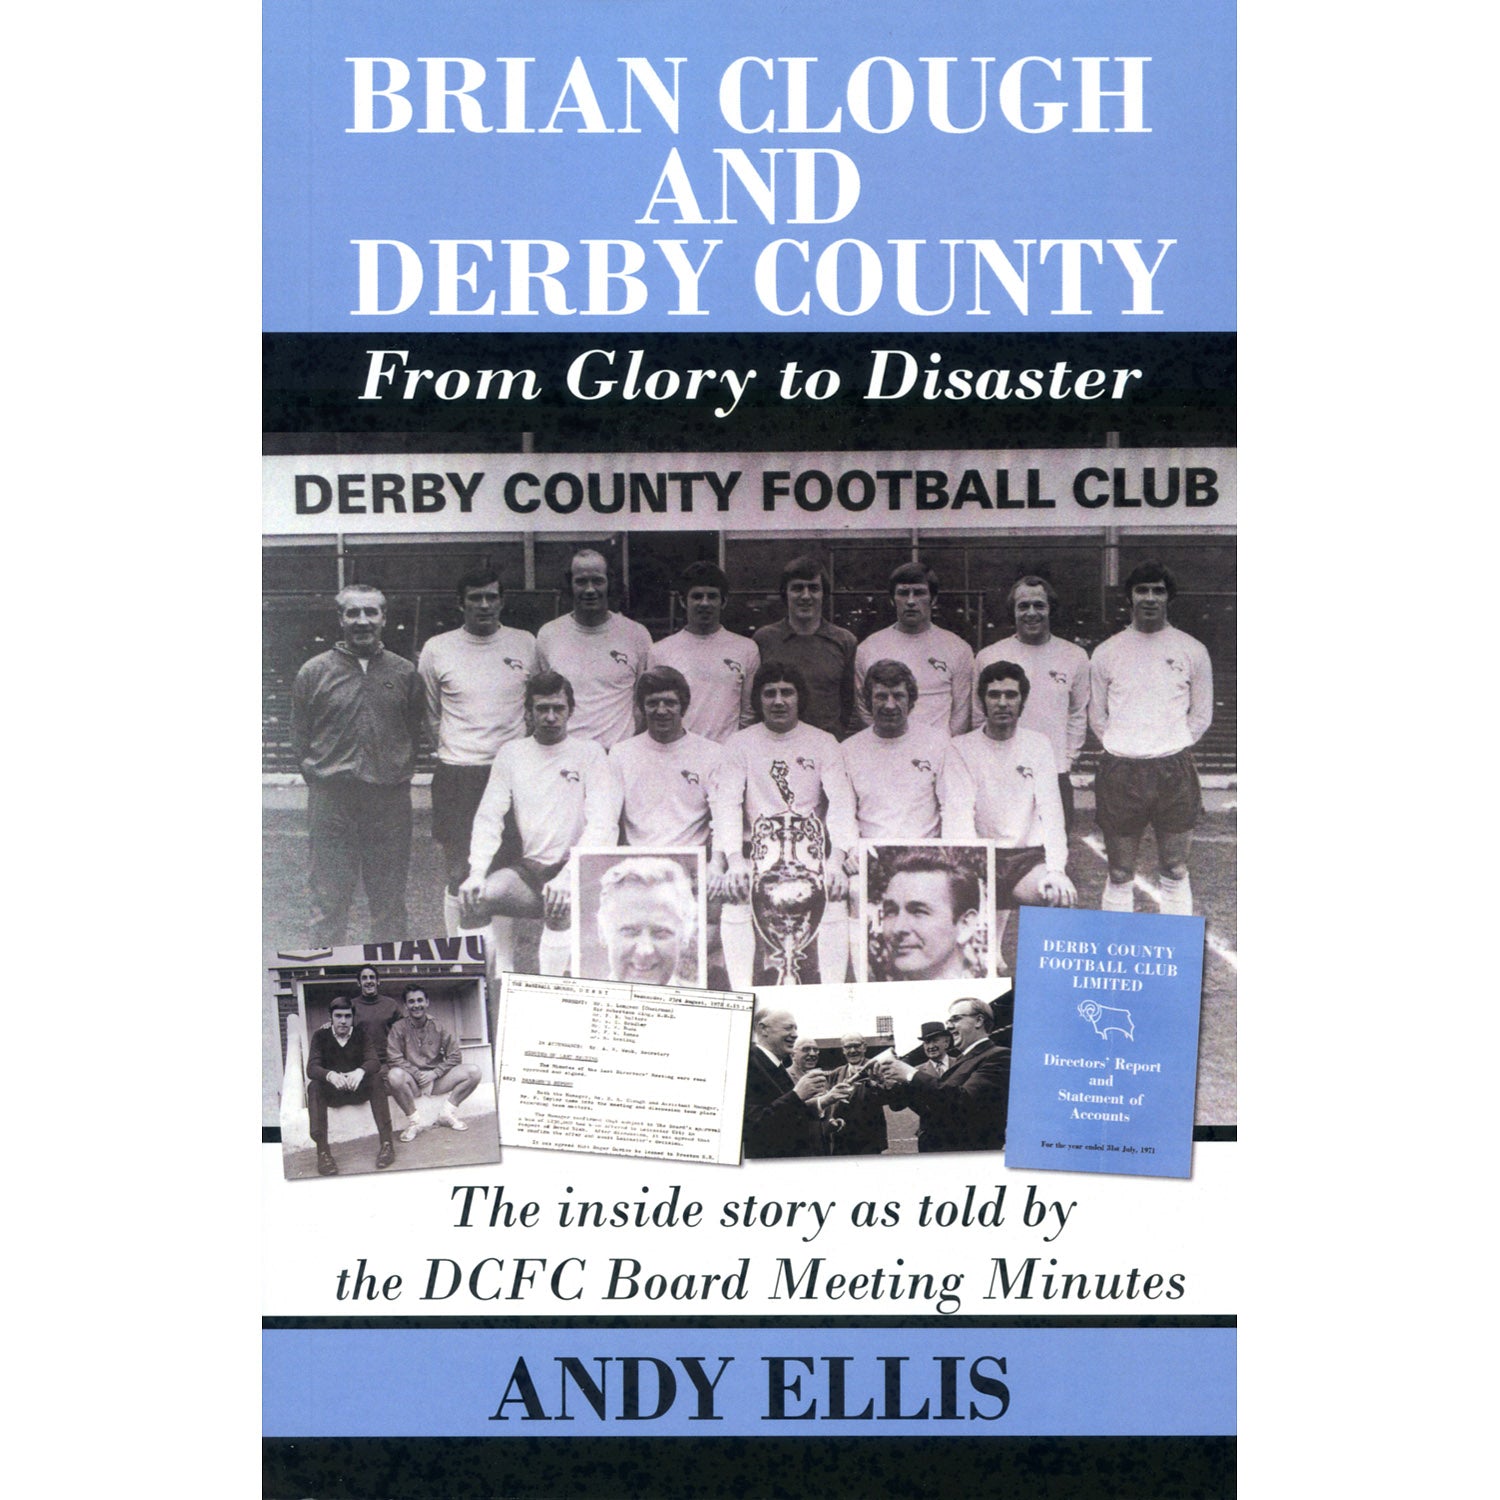 Brian Clough and Derby County – From Glory to Disaster